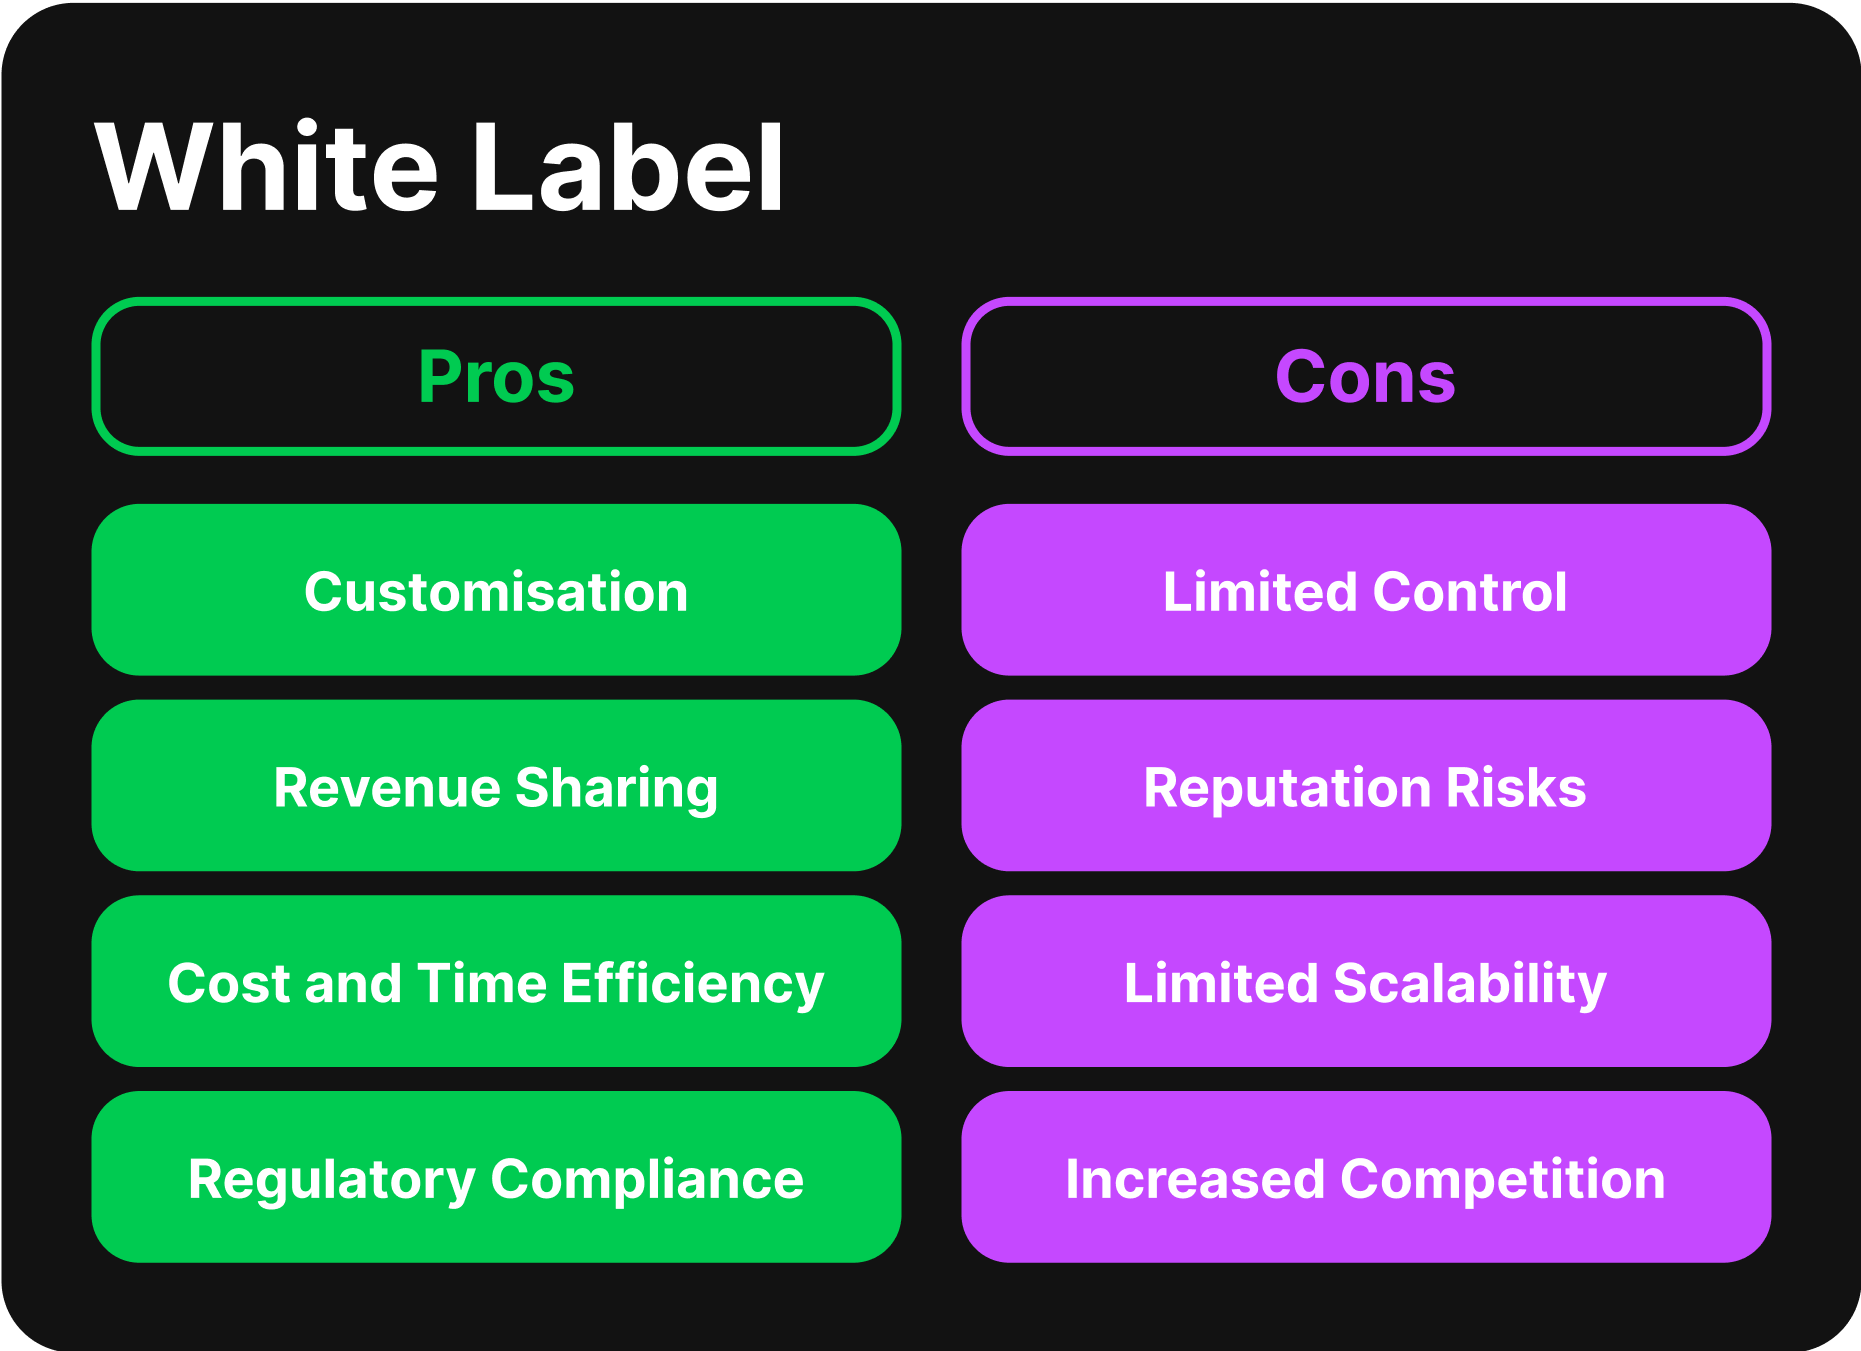 pros and cons of White Label